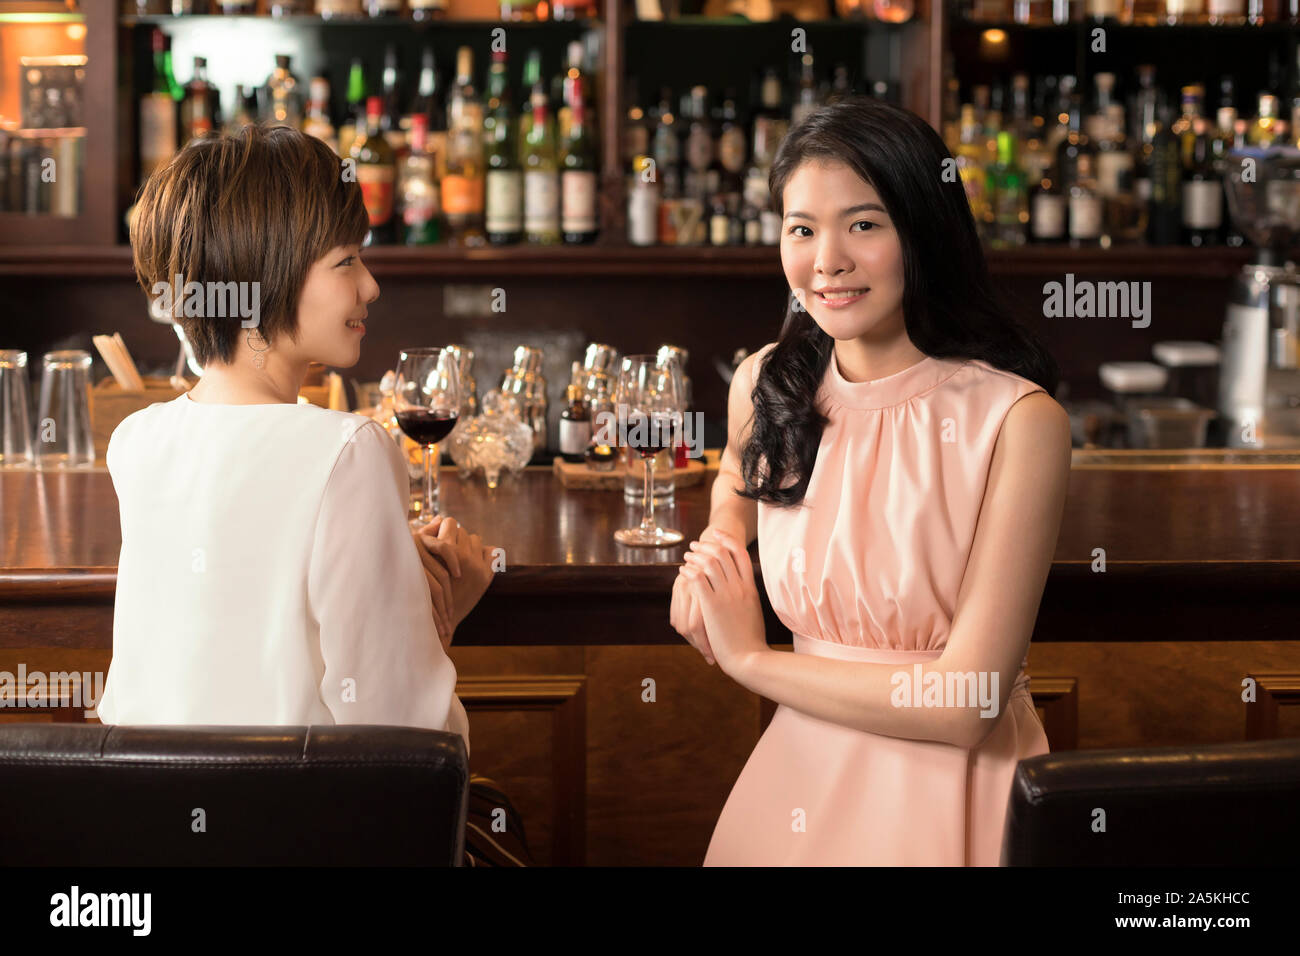 Two smiling young women at bar counter Stock Photo